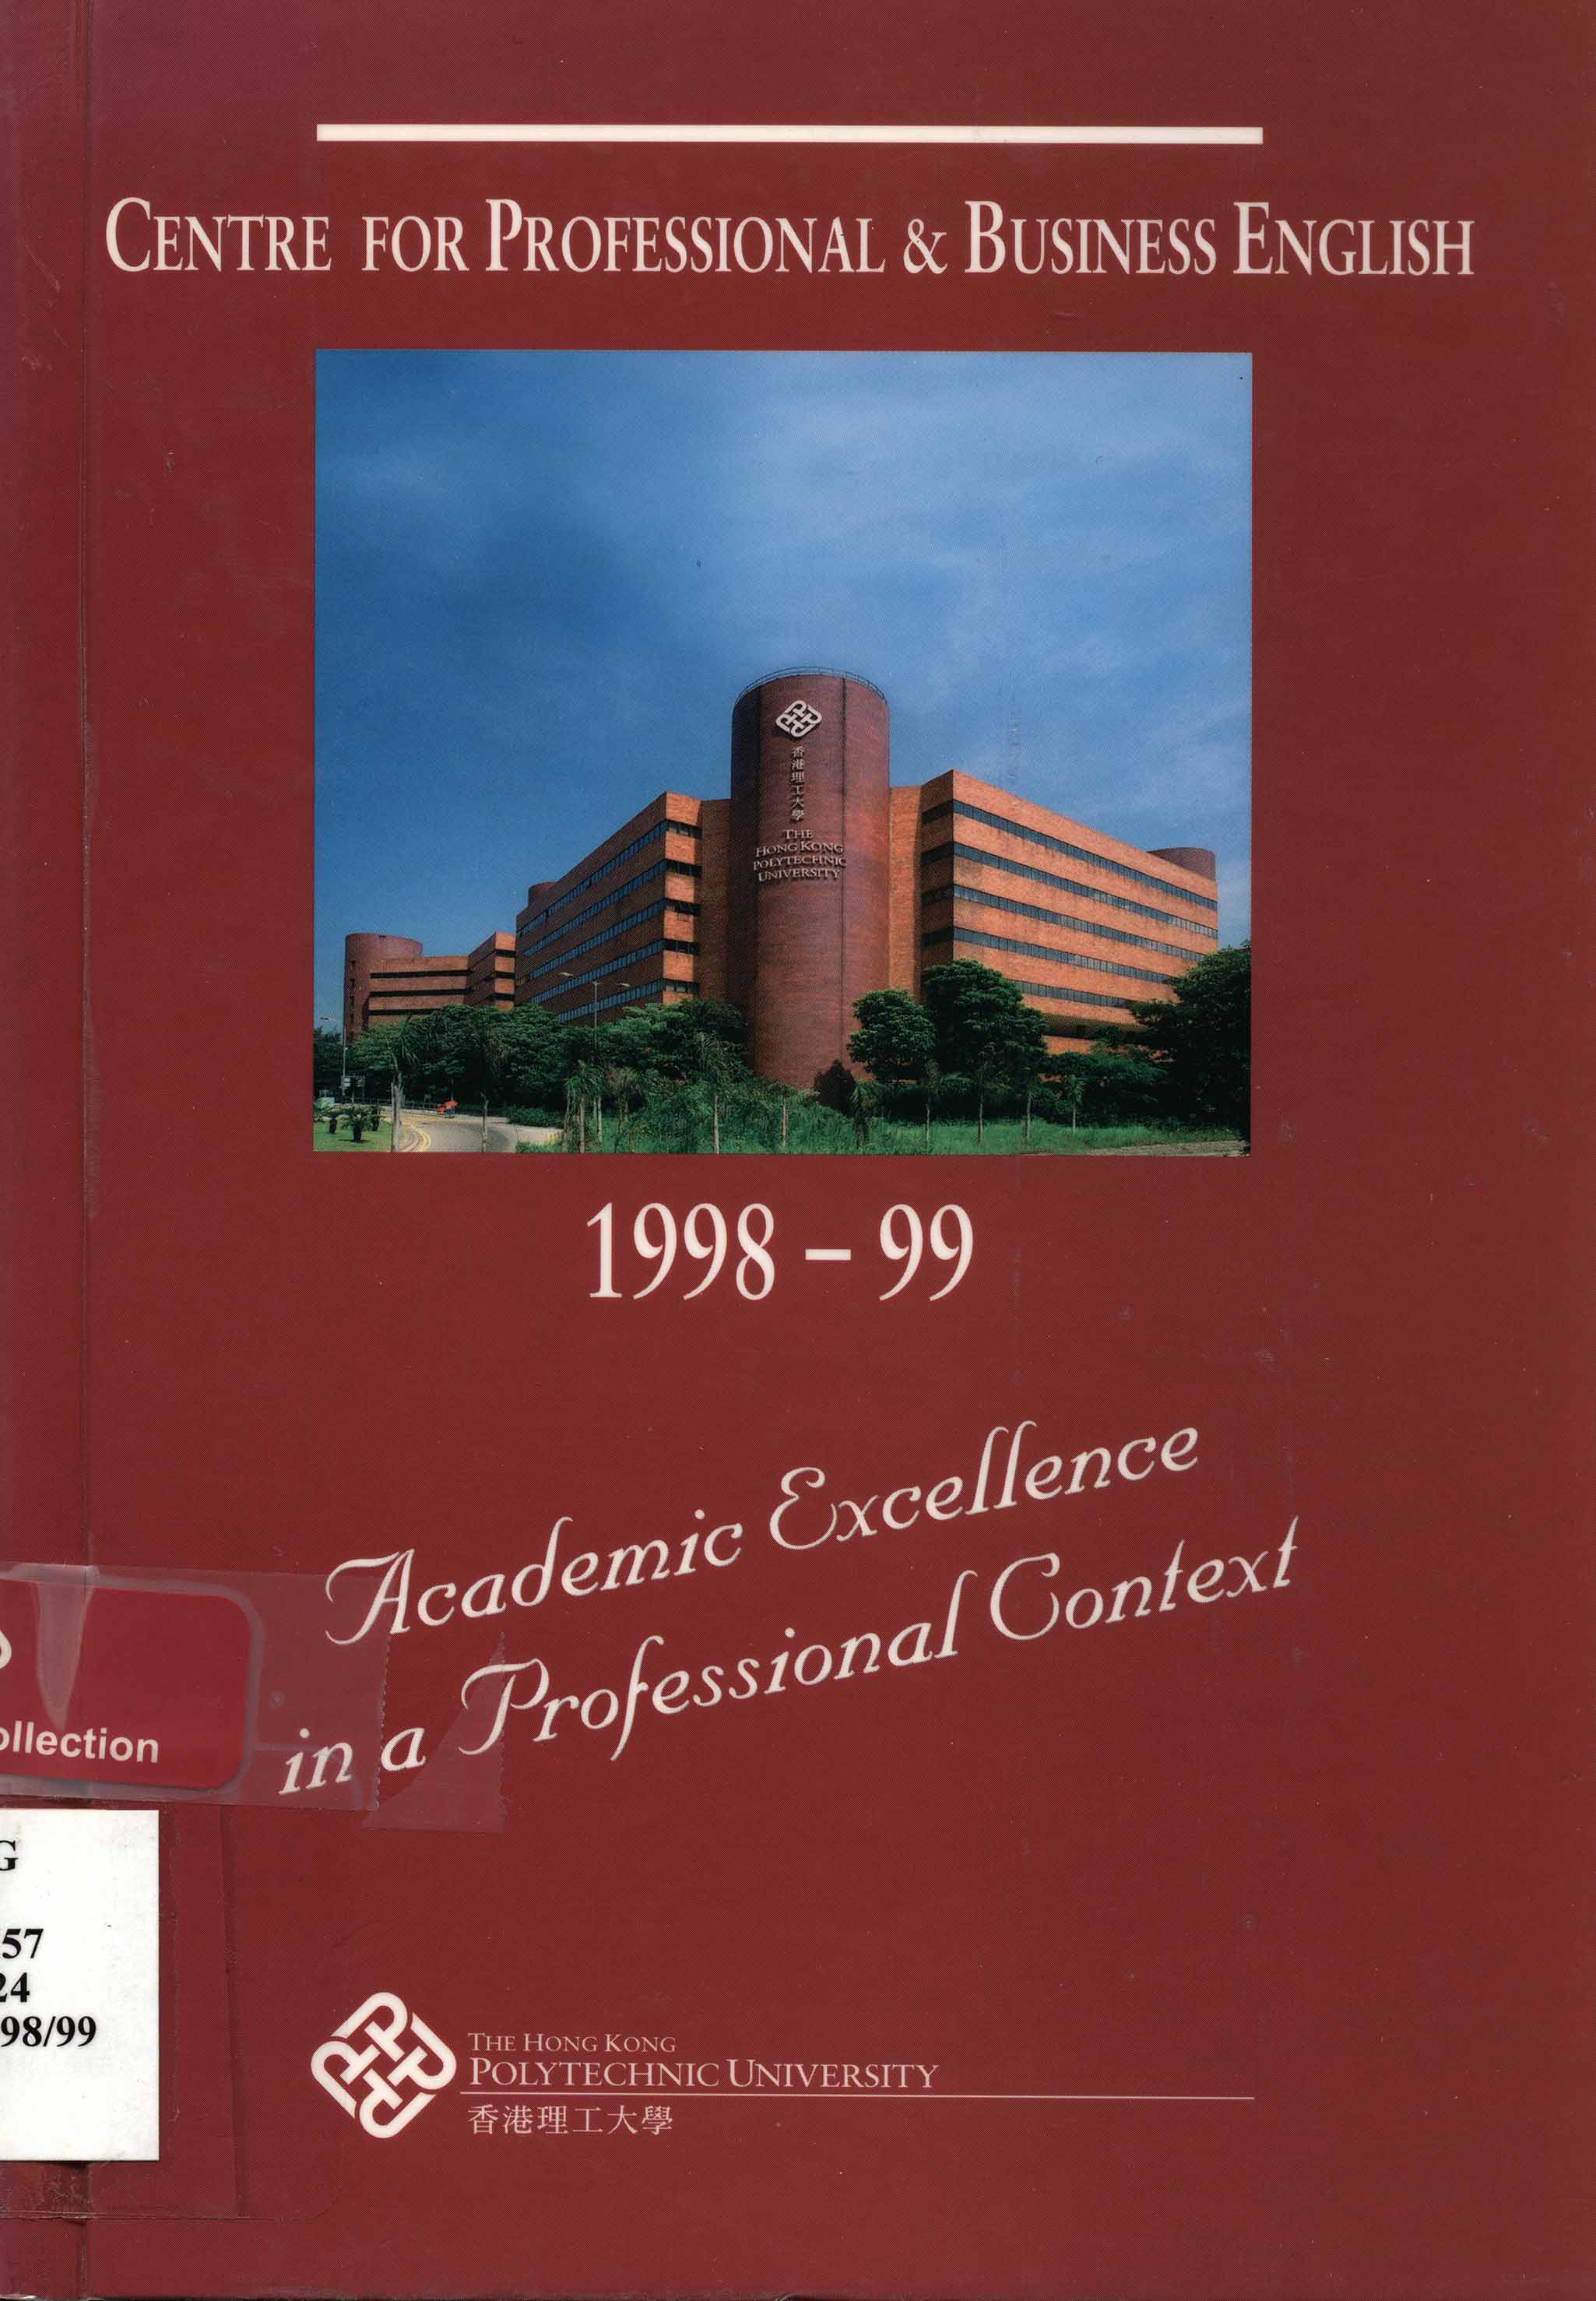 Academic excellence in a professional context [1998/99]